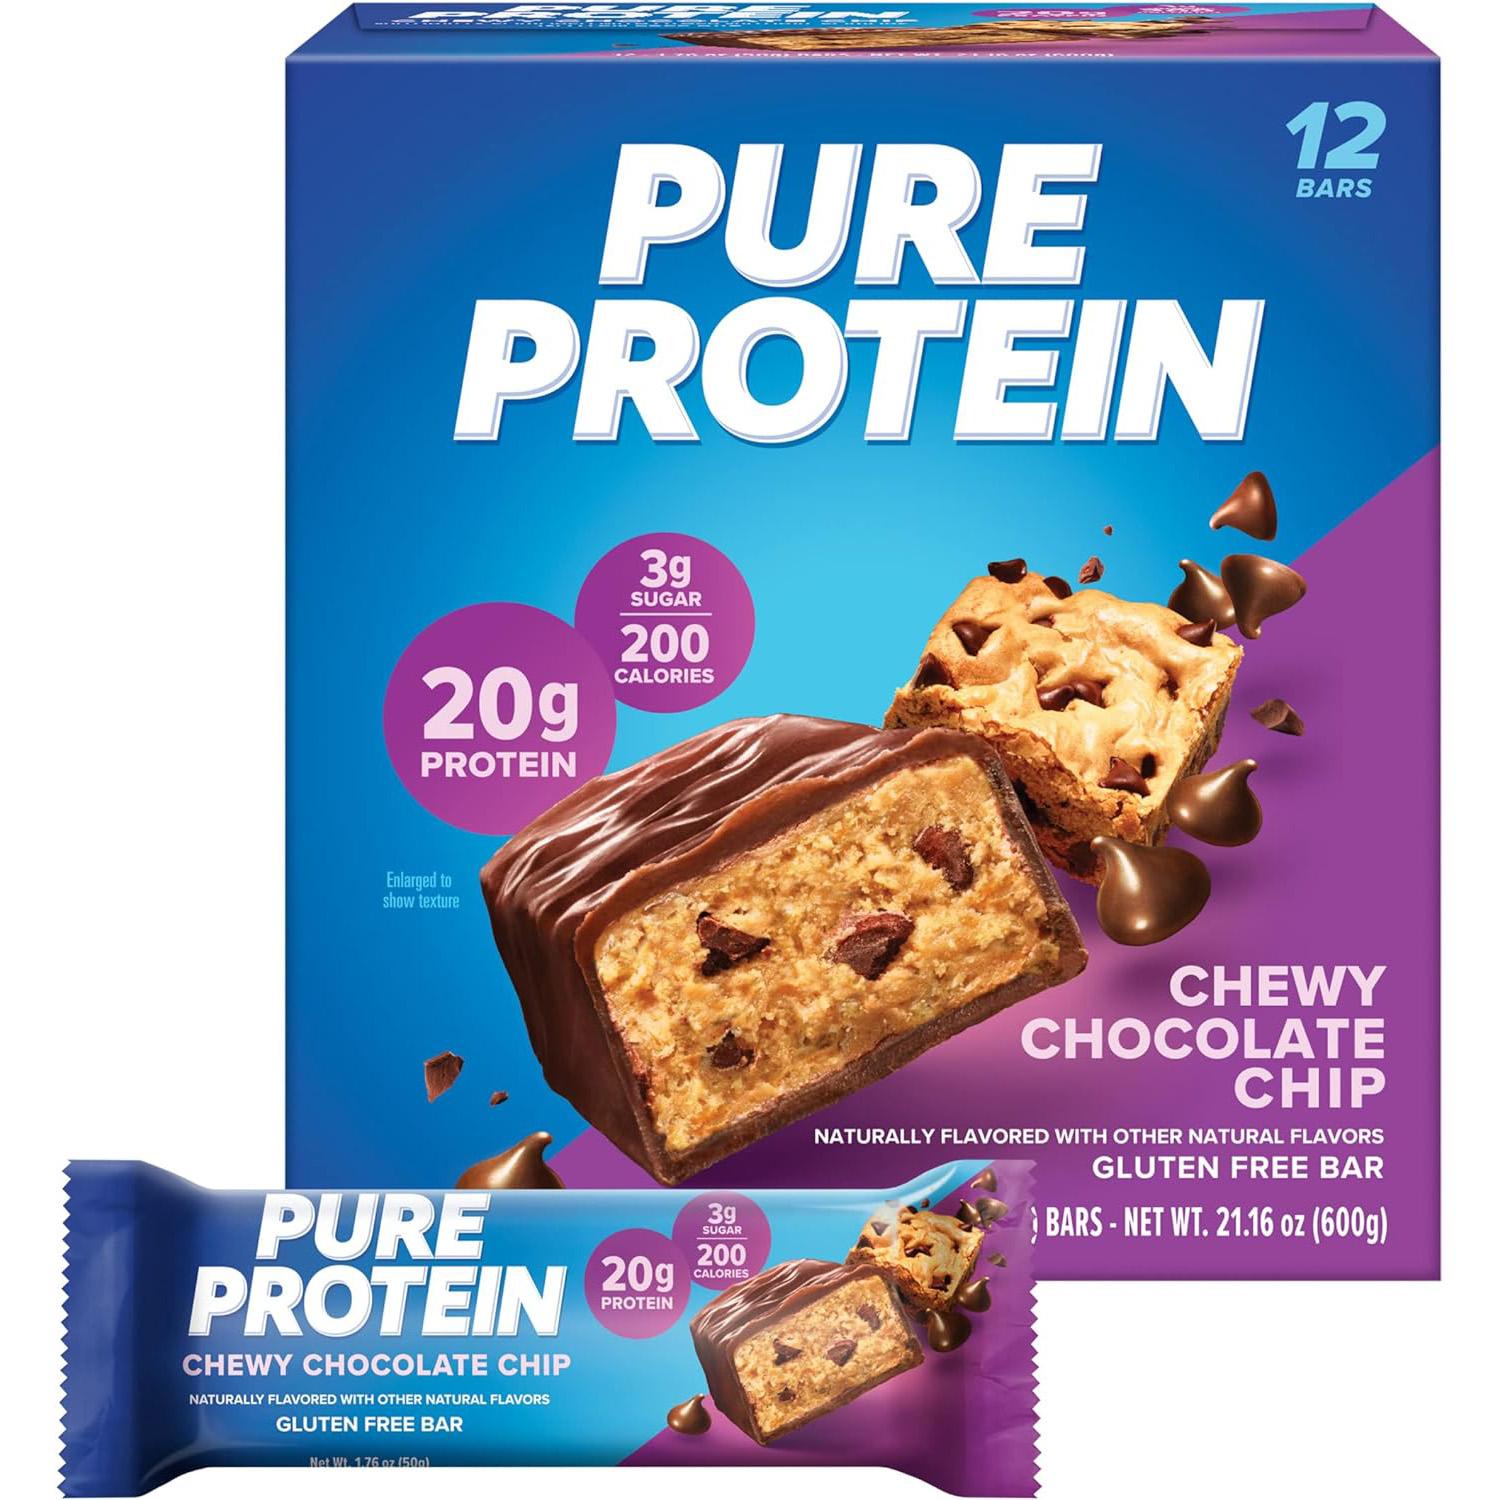 Pure Protein Chewy Chocolate Chip Bars 12 Pack for $12.49